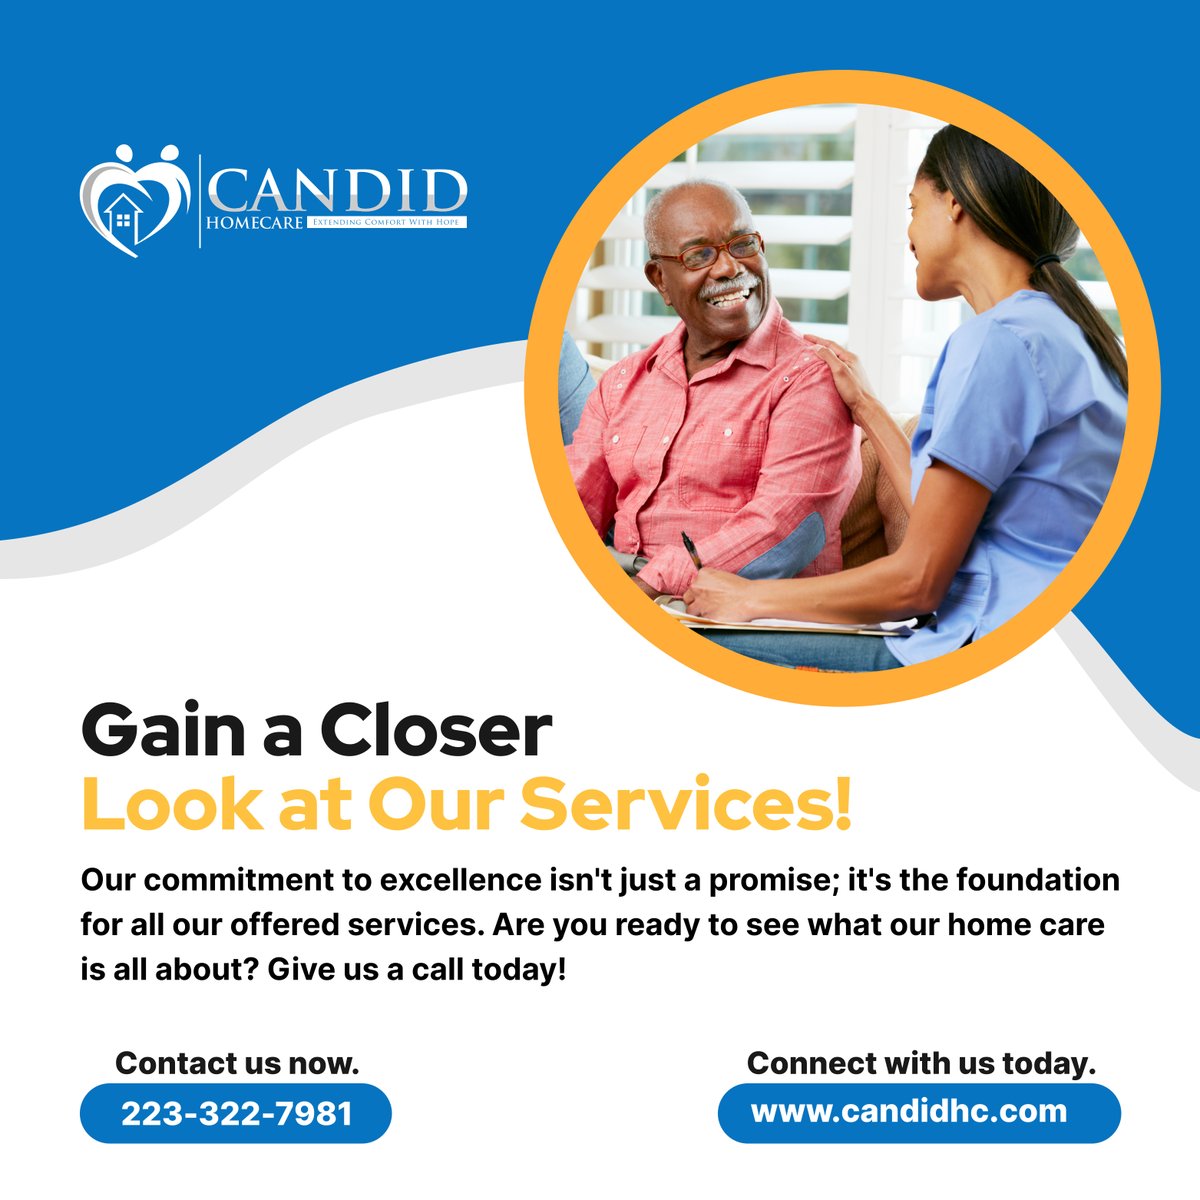 From our trained and dedicated staff to our top-of-the-line services, we are dedicated to exceeding your expectations when it comes to your home care needs. Check out our services here: tinyurl.com/yadr5xx2. 

#HenricoVirginia #OurArrayOfServices #Homecare